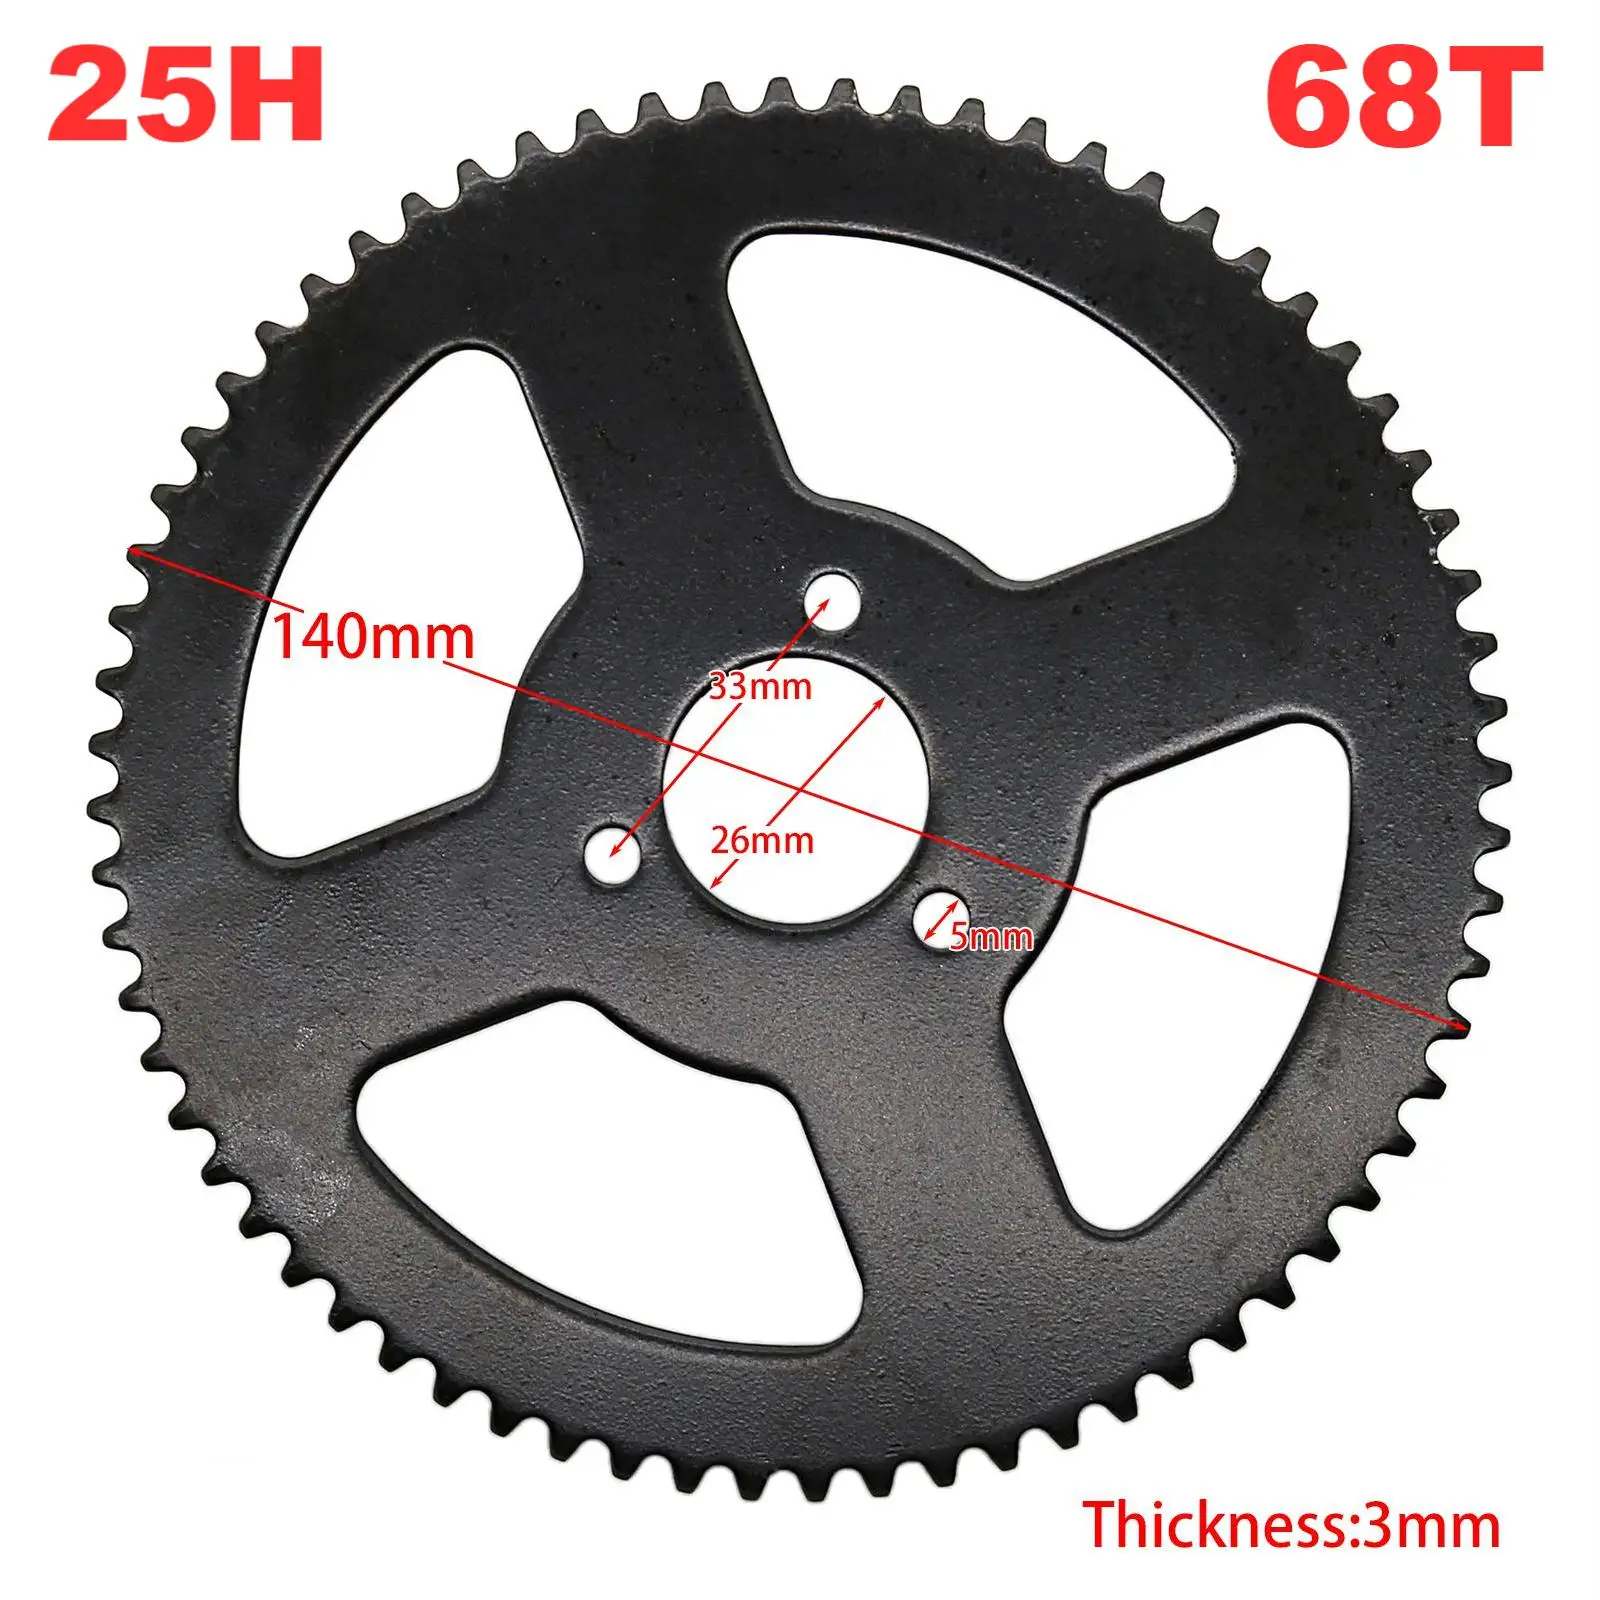 

25H 68T Tooth 26mm 2 Stroke Mini ATV Steel Rear Chain Sprocket For 47cc 49cc Chinese Pocket Bike Quad 4 Wheeler Scooter